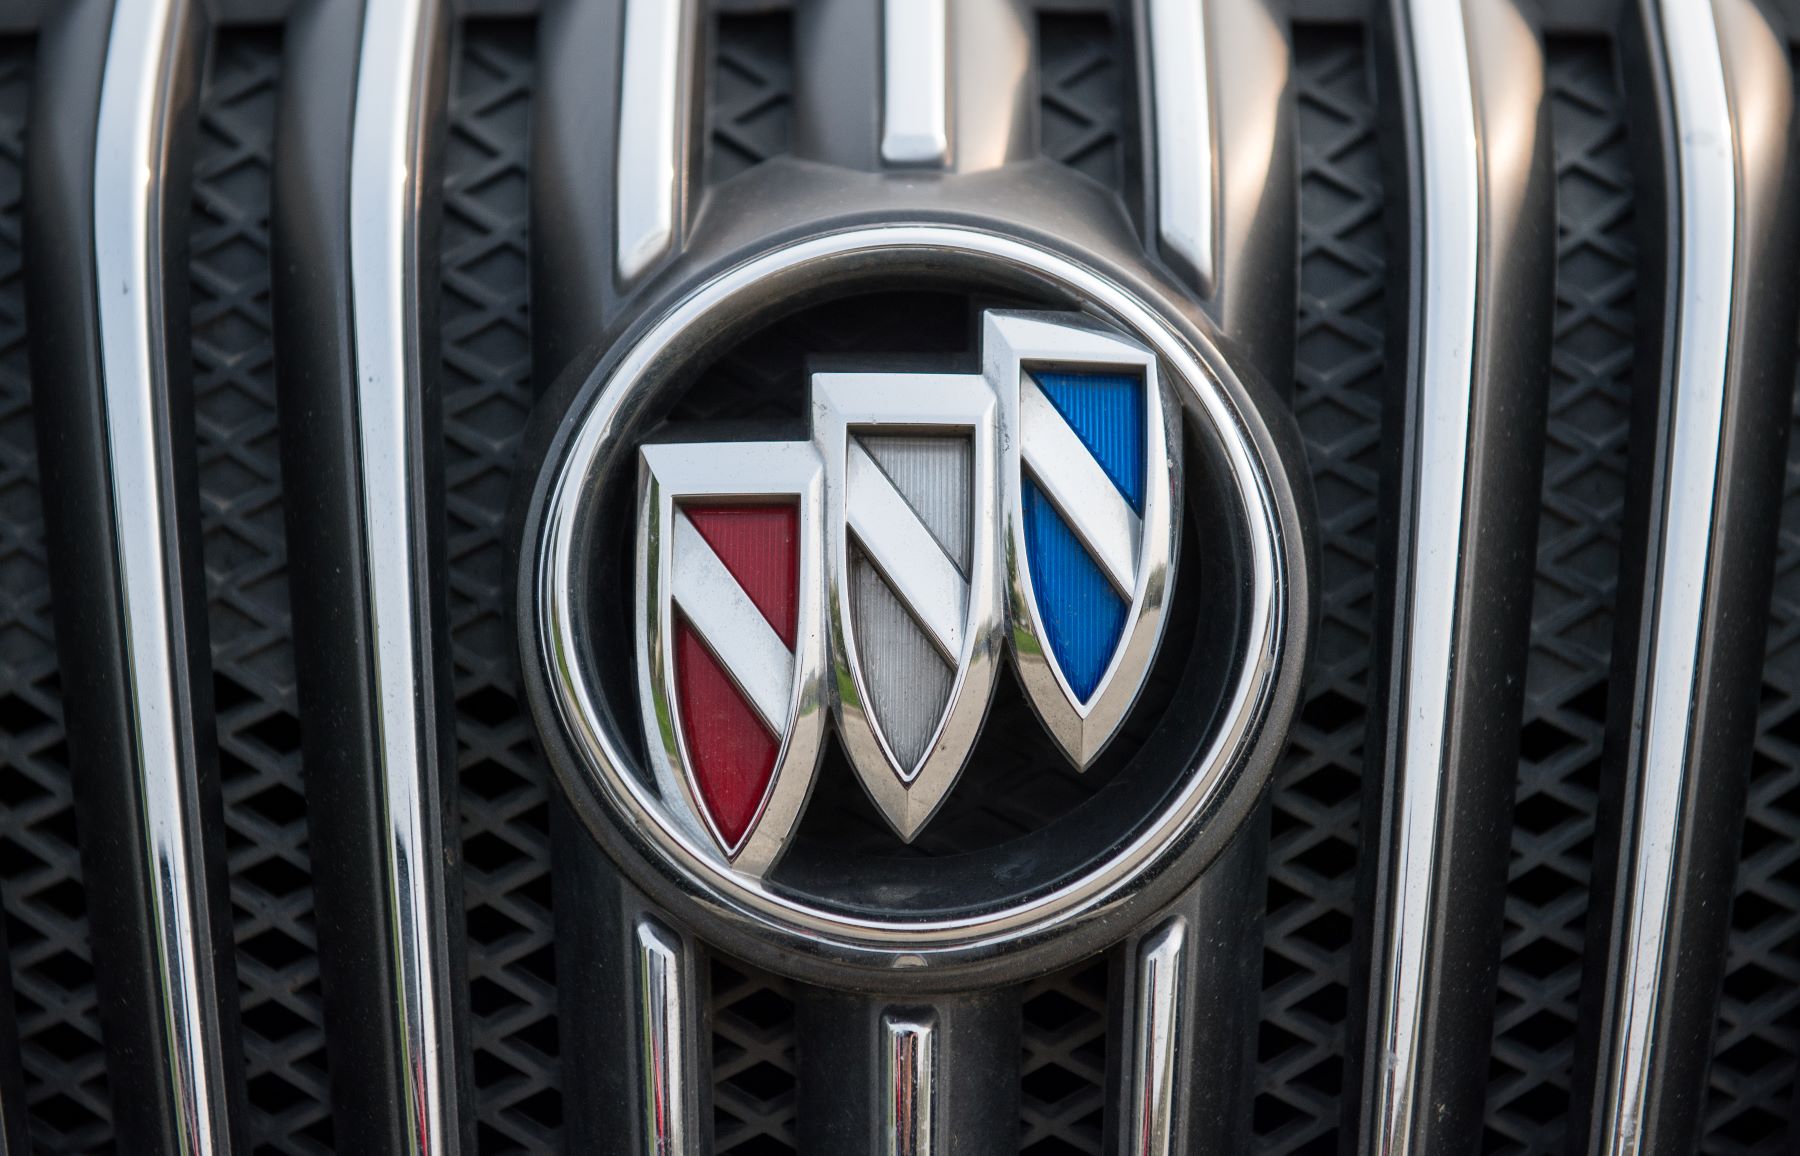 The Buick logo on the front grille of a vehicle seen in Hefei, China